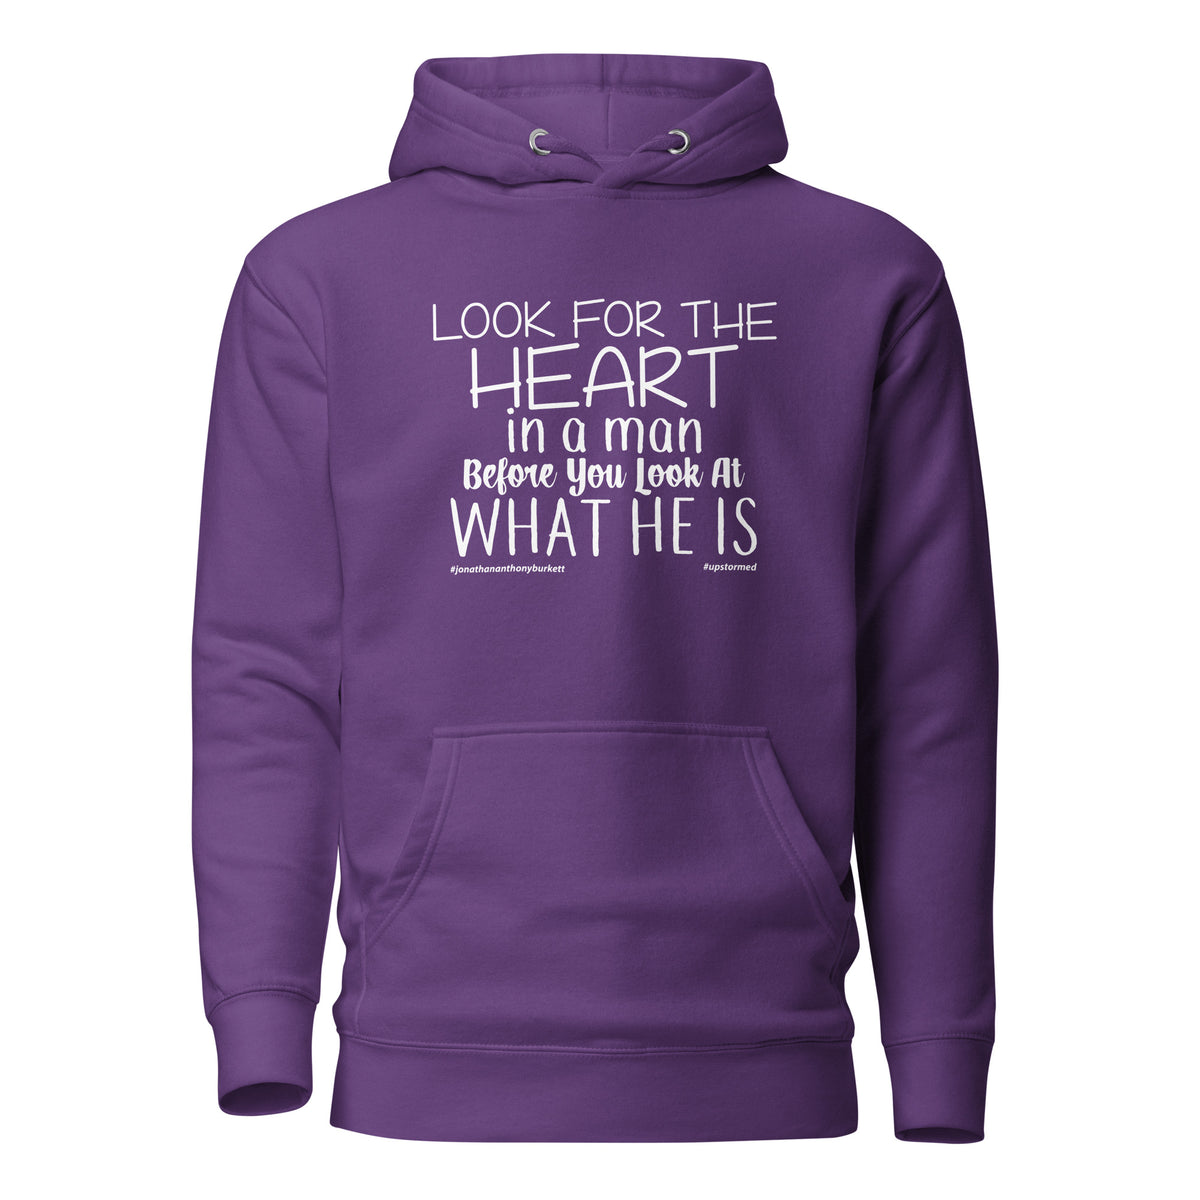 Look For The Heart In A Man Upstormed Hoodie